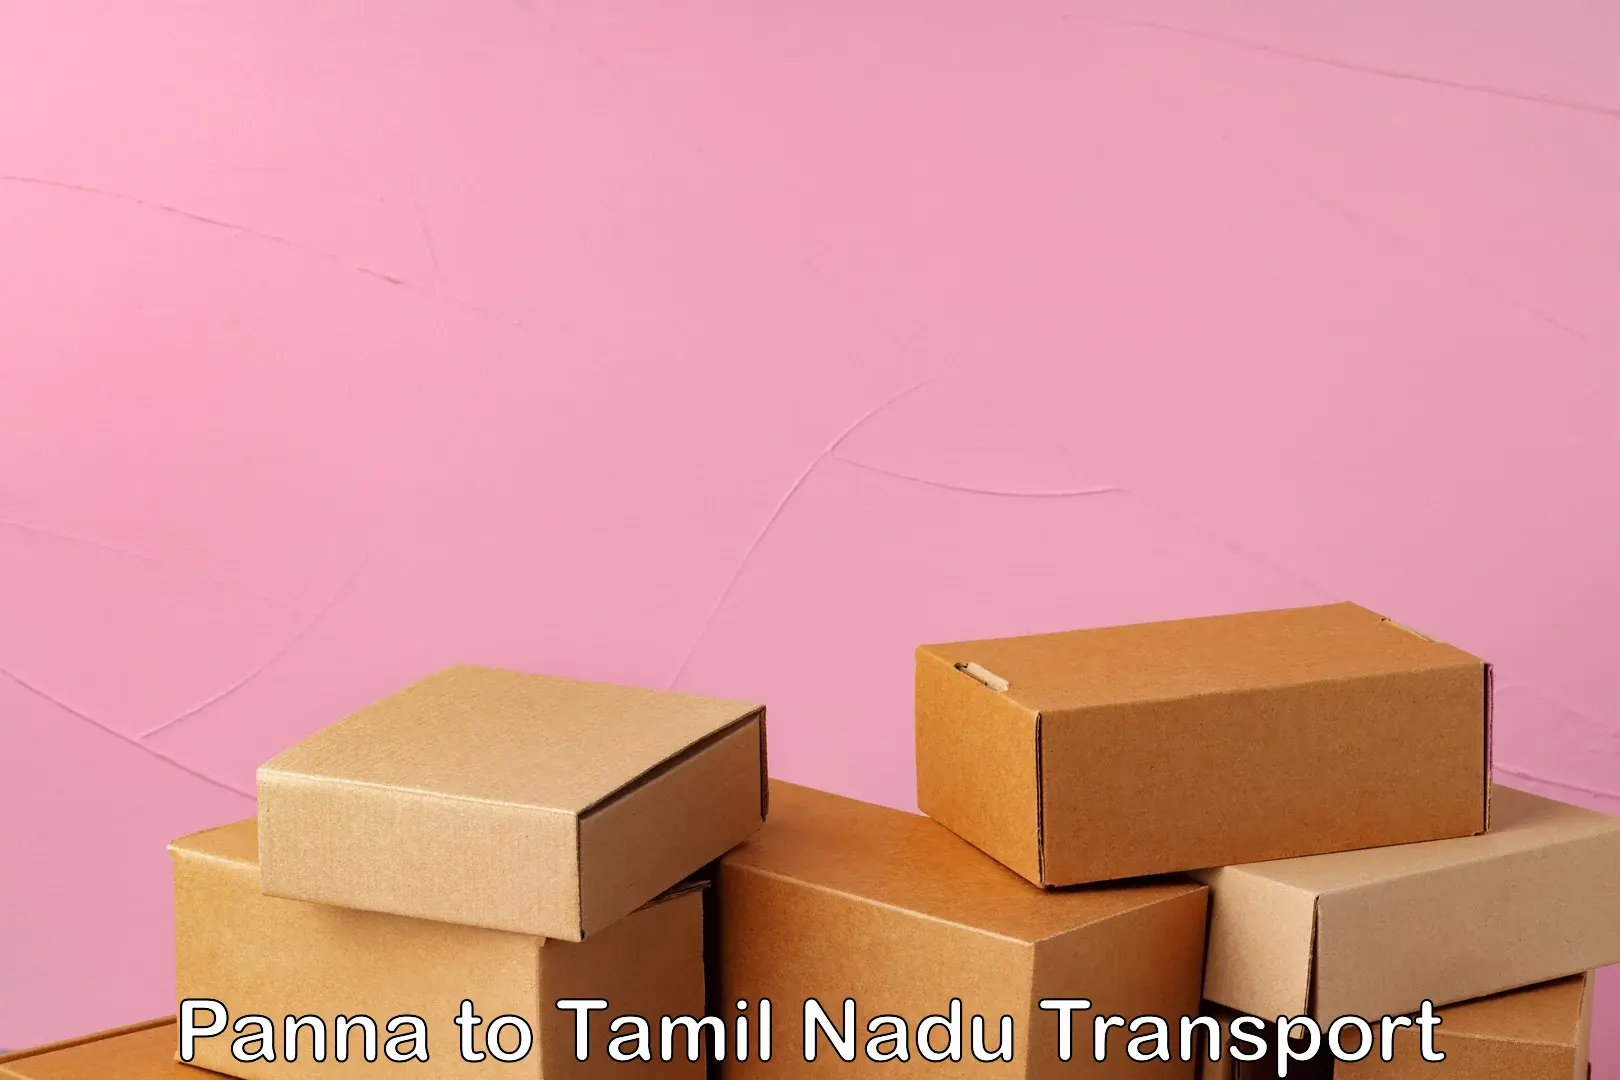 Truck transport companies in India Panna to Meenakshi Academy of Higher Education and Research Chennai